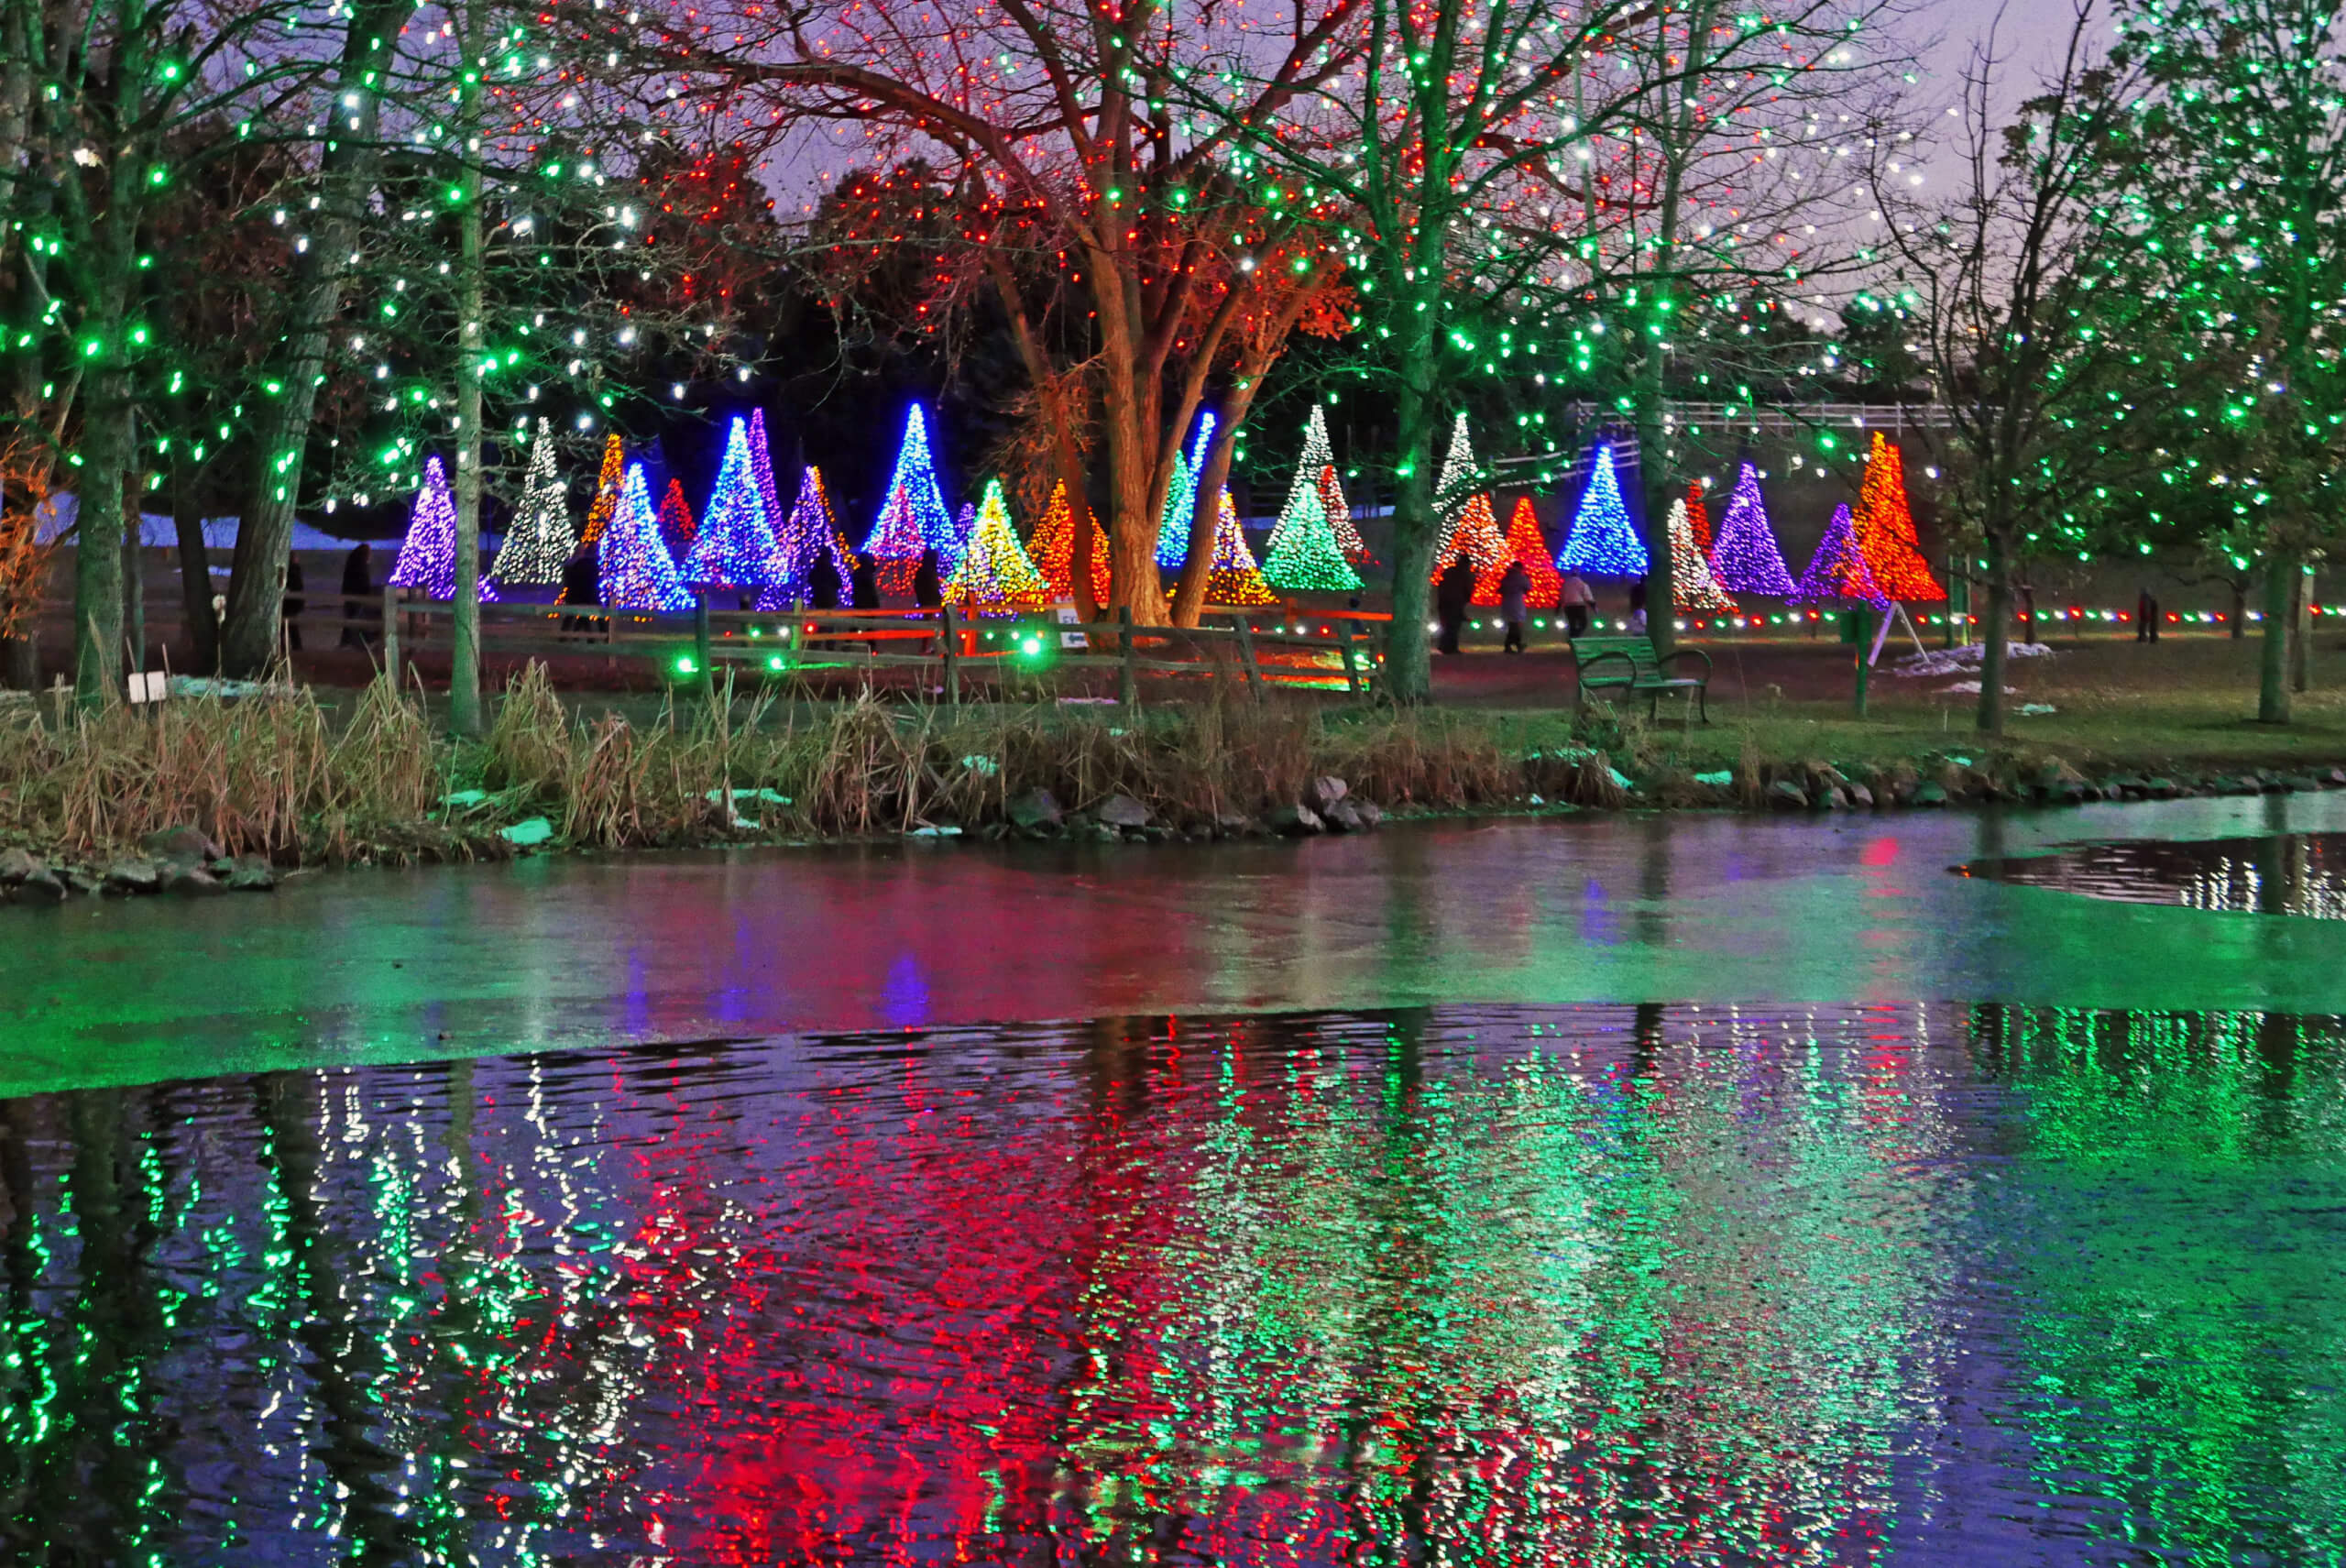 Christmas trees and holiday lights reflecting off a frosted pond at Hudson Gardens near Denver, Colorado